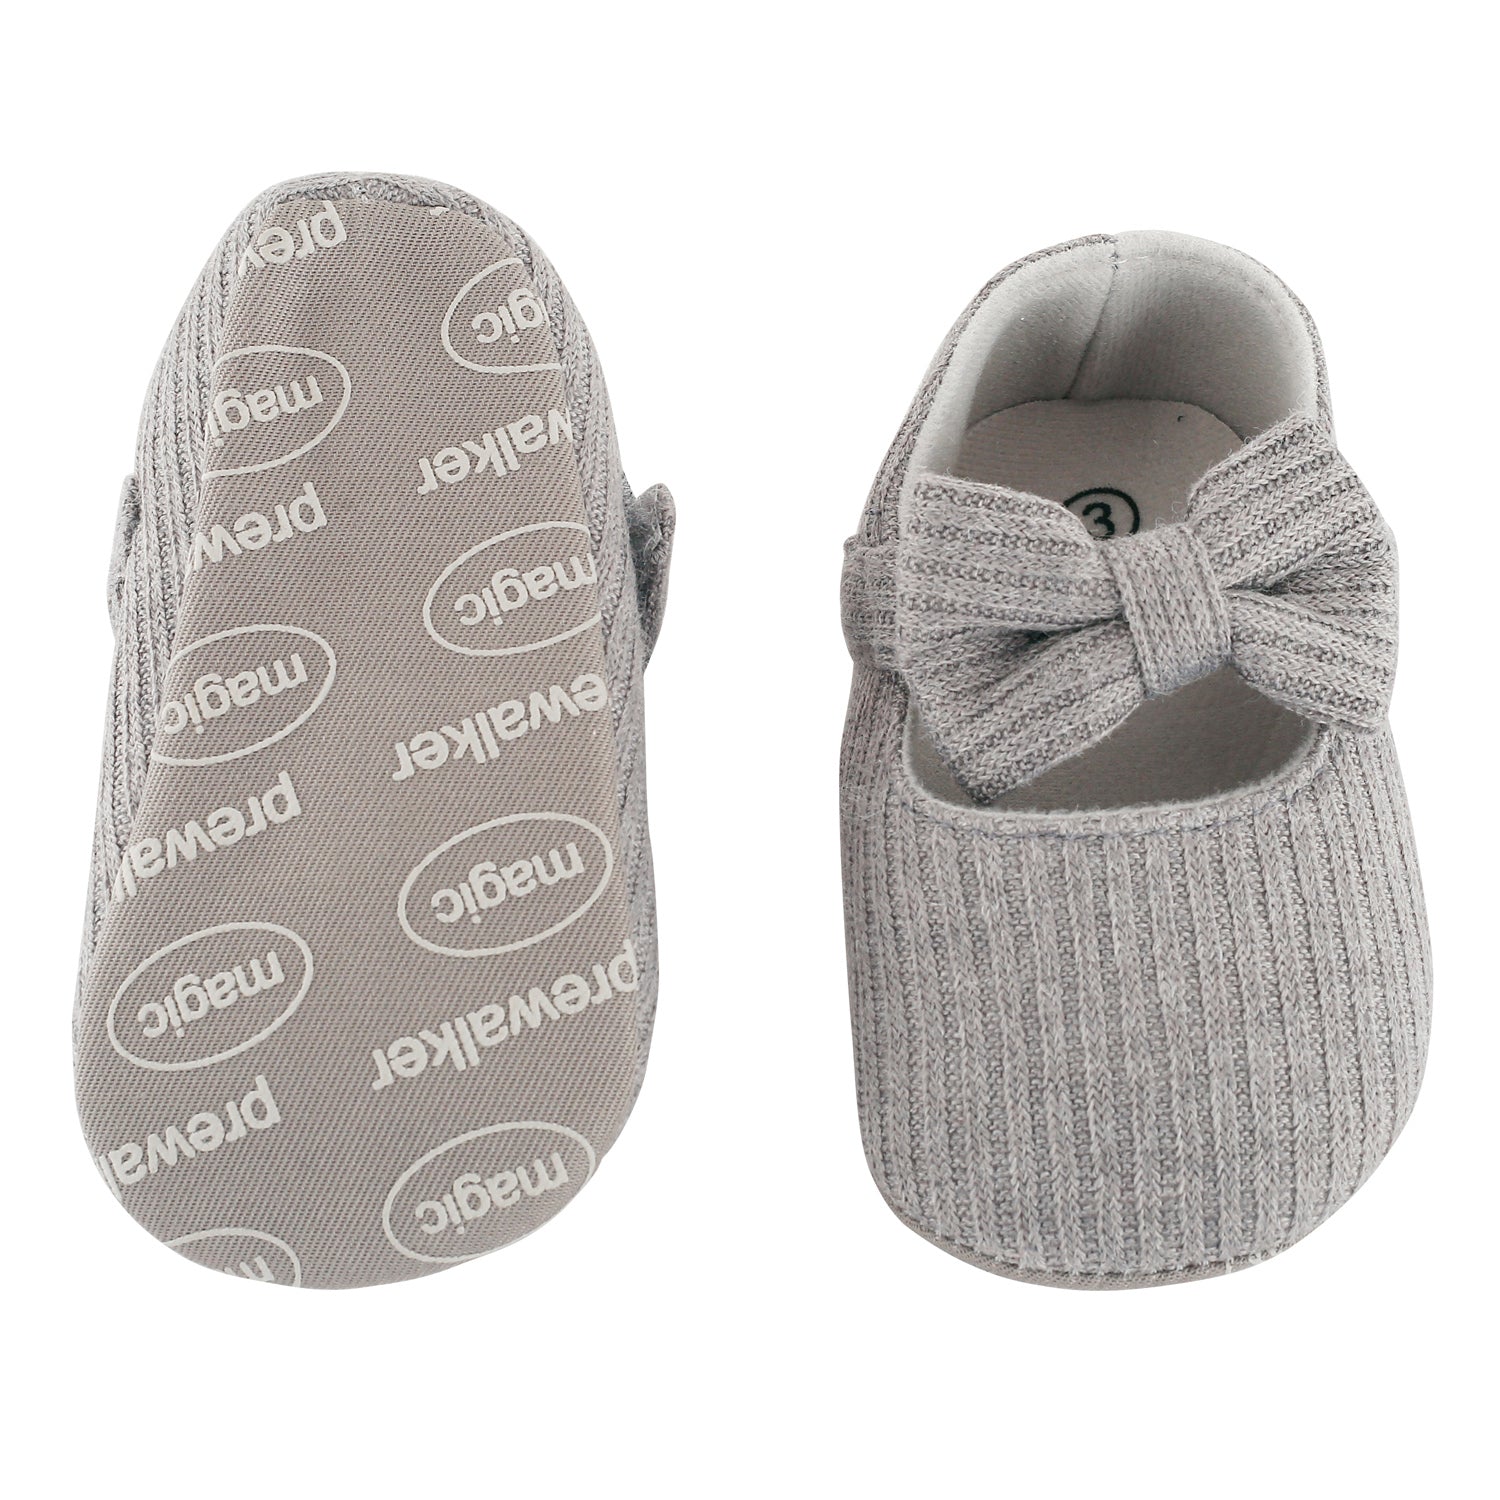 Baby Moo Pretty Bow Grey Booties